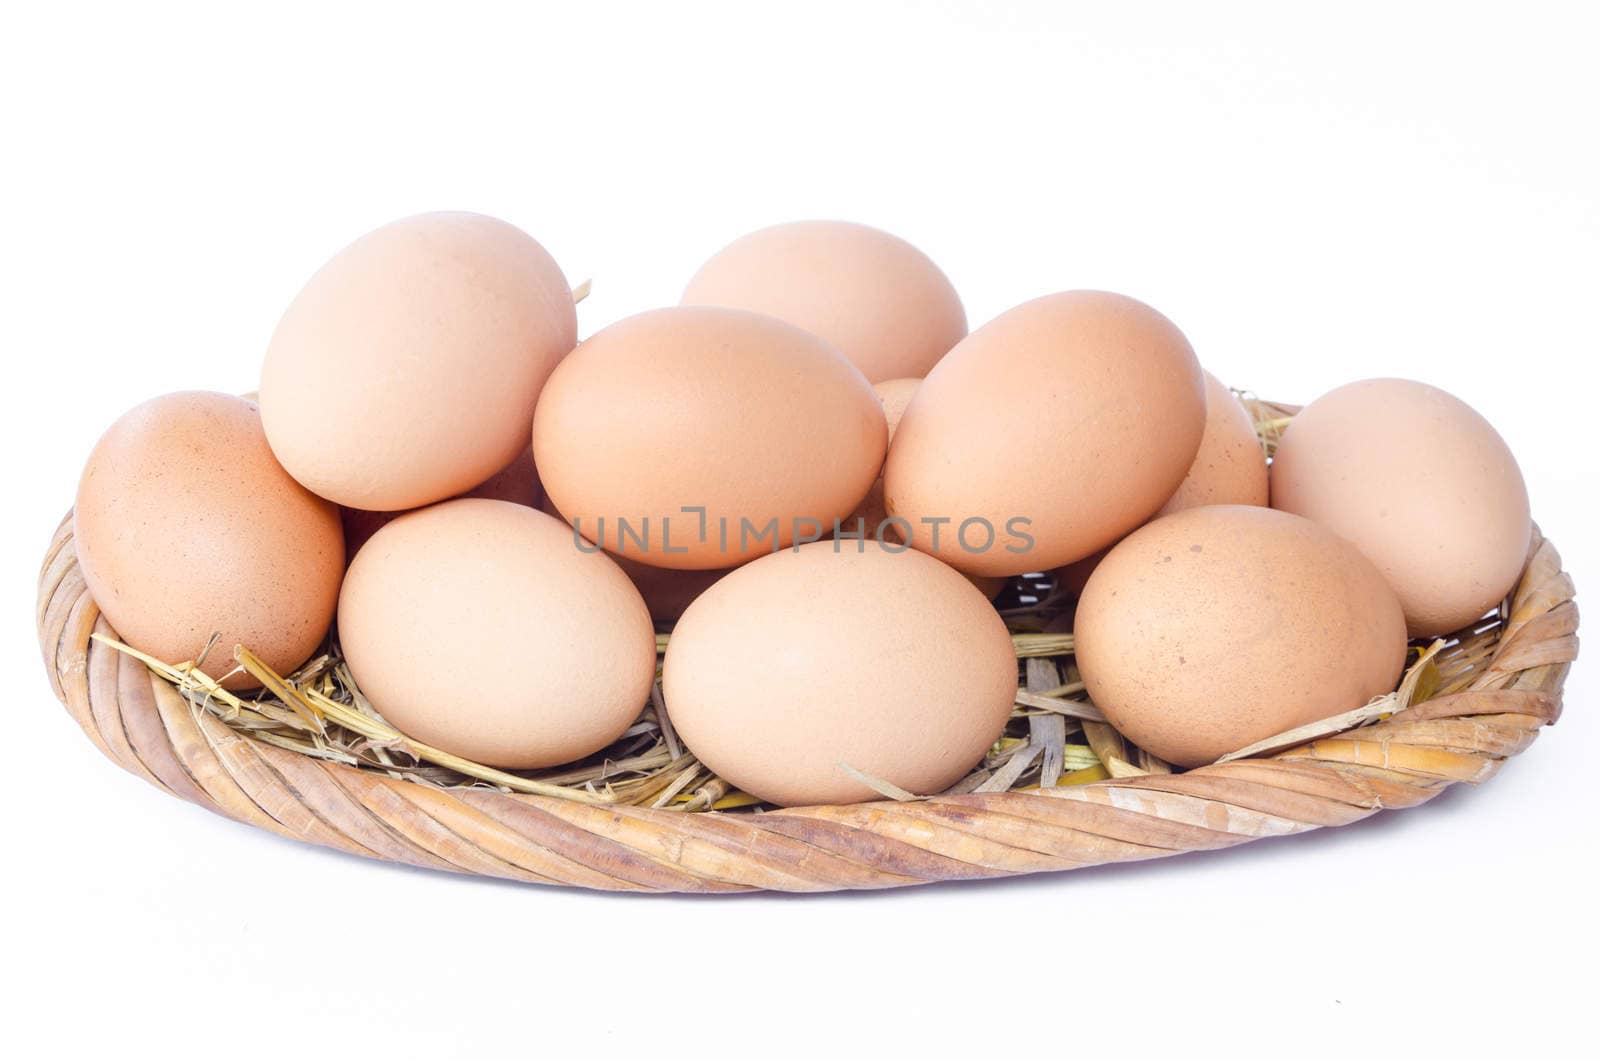 Eggs in weave basket on white background.